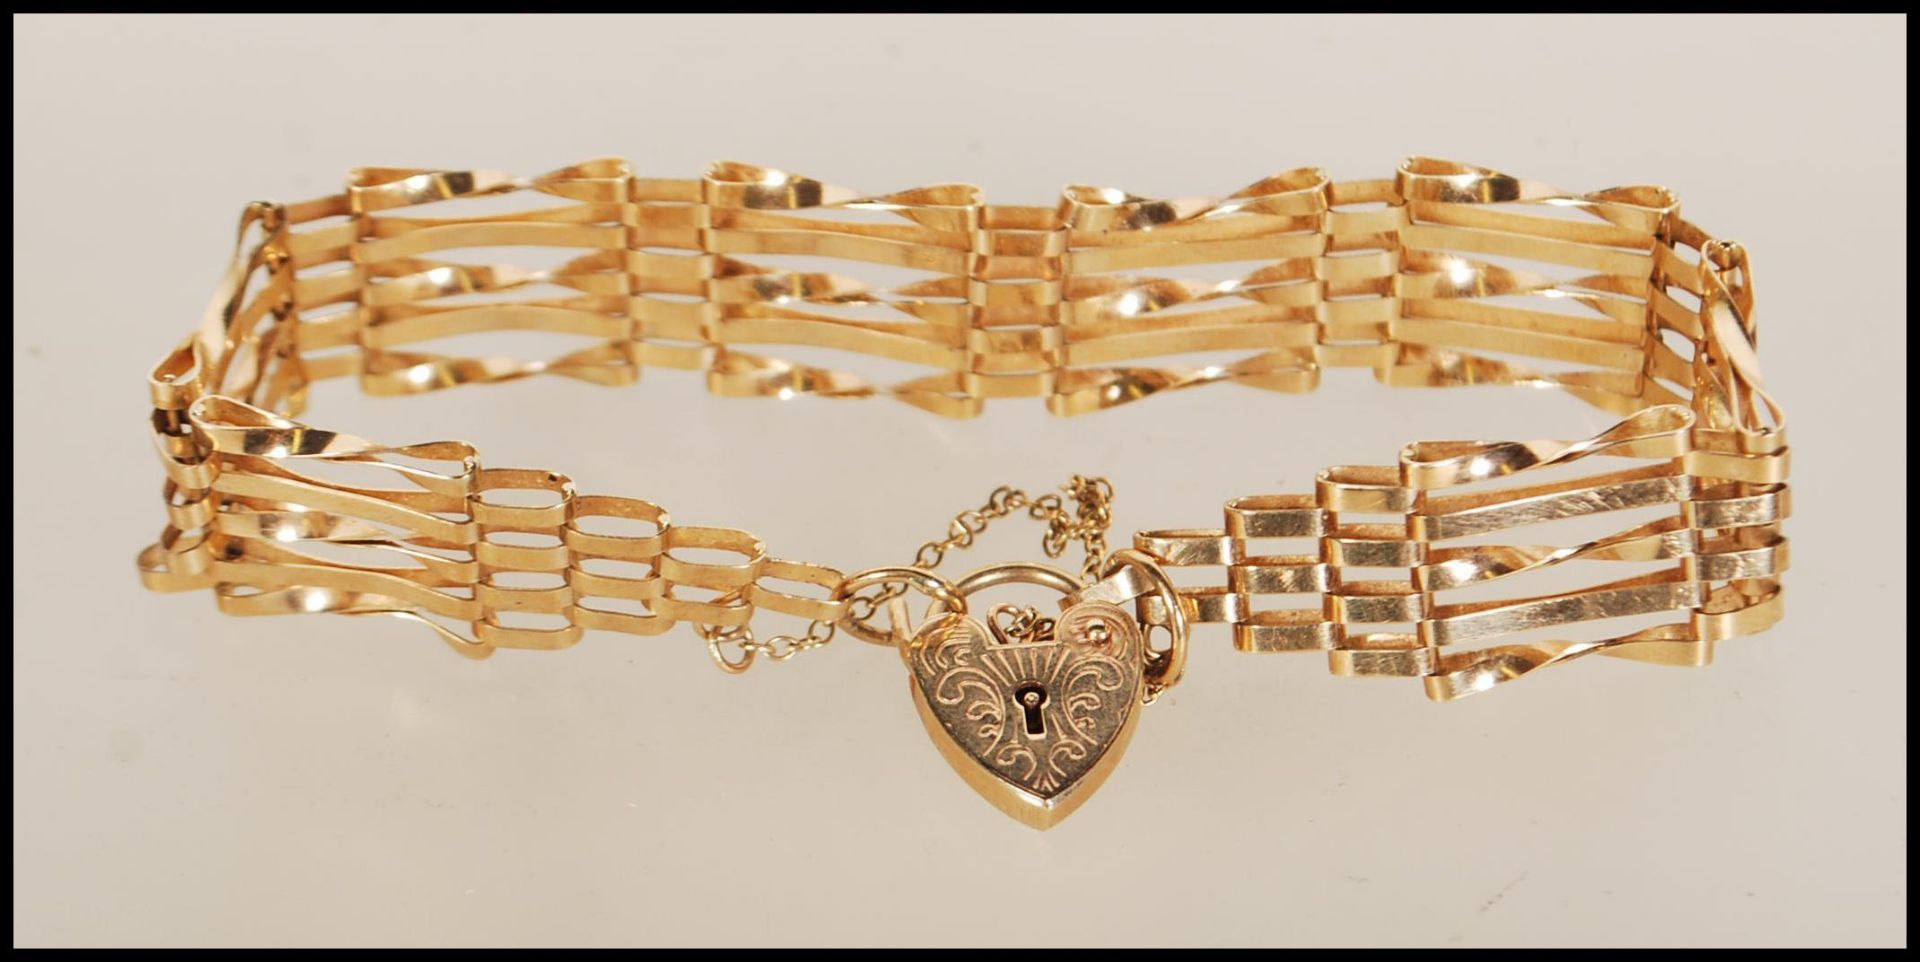 A hallmarked 9ct gold gate bracelet with tapered ends and attached heart-shaped padlock.